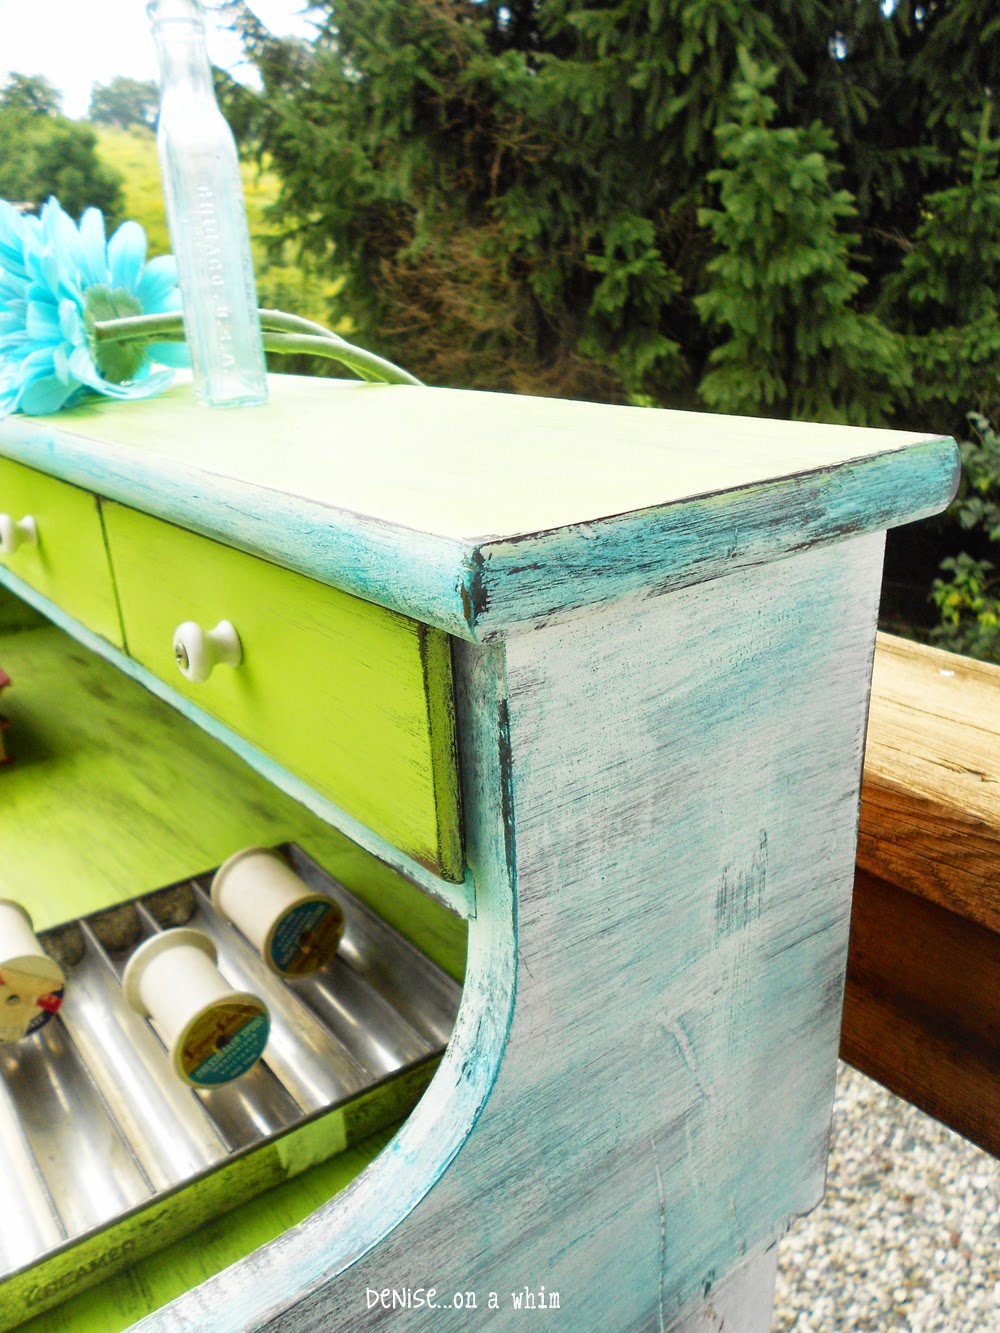 Dry-brushed teal blue over white on a dry sink makeover from Denise On a Whim